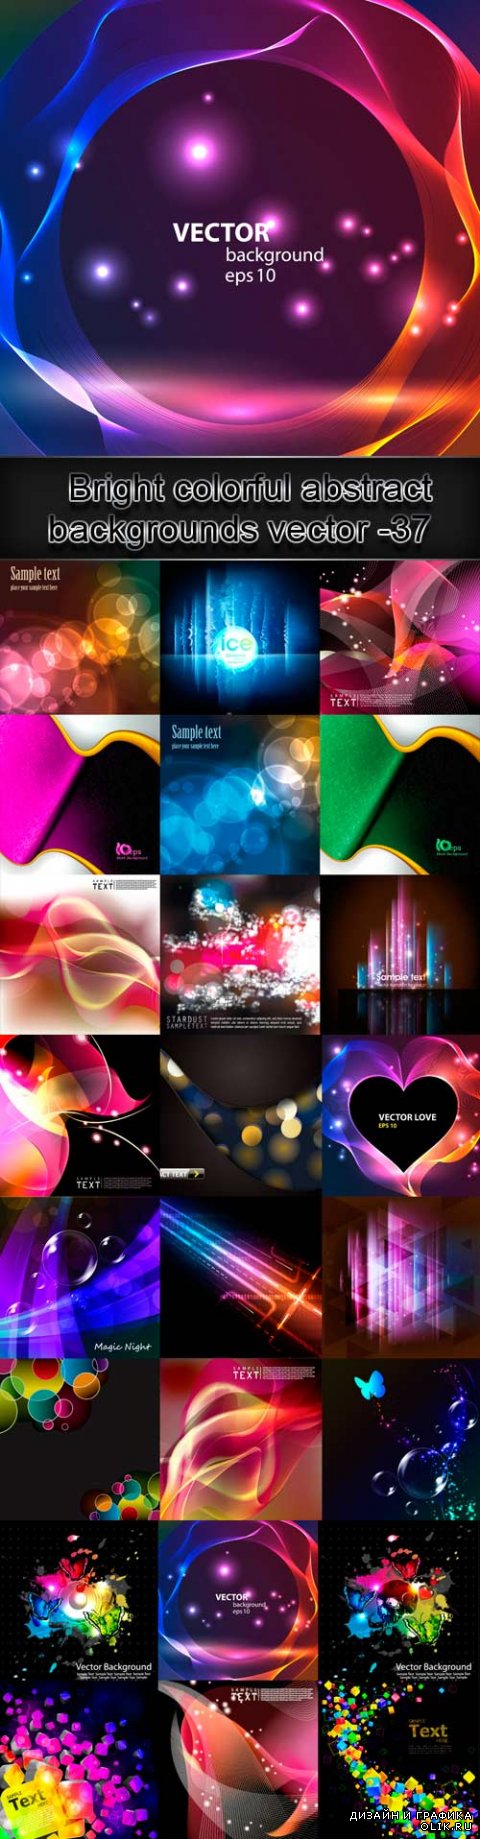 Bright colorful abstract backgrounds vector -37